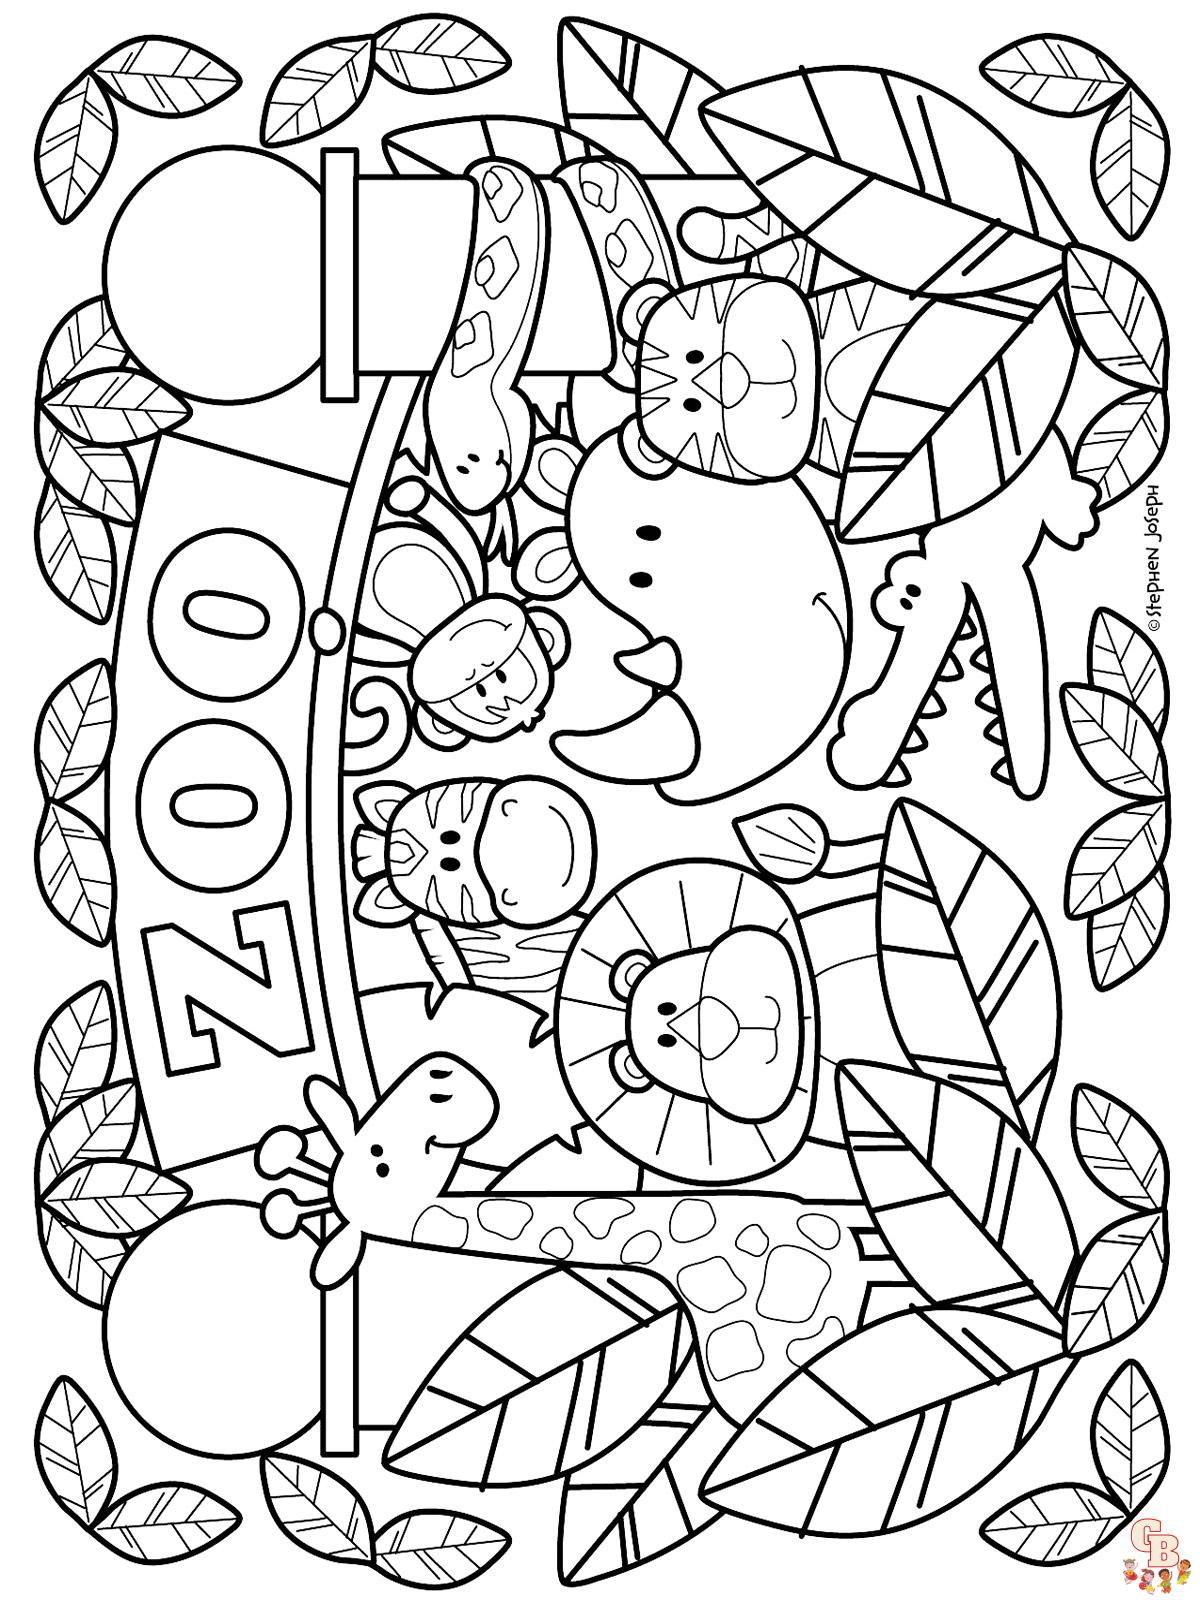 Zoo Coloring Pages 2